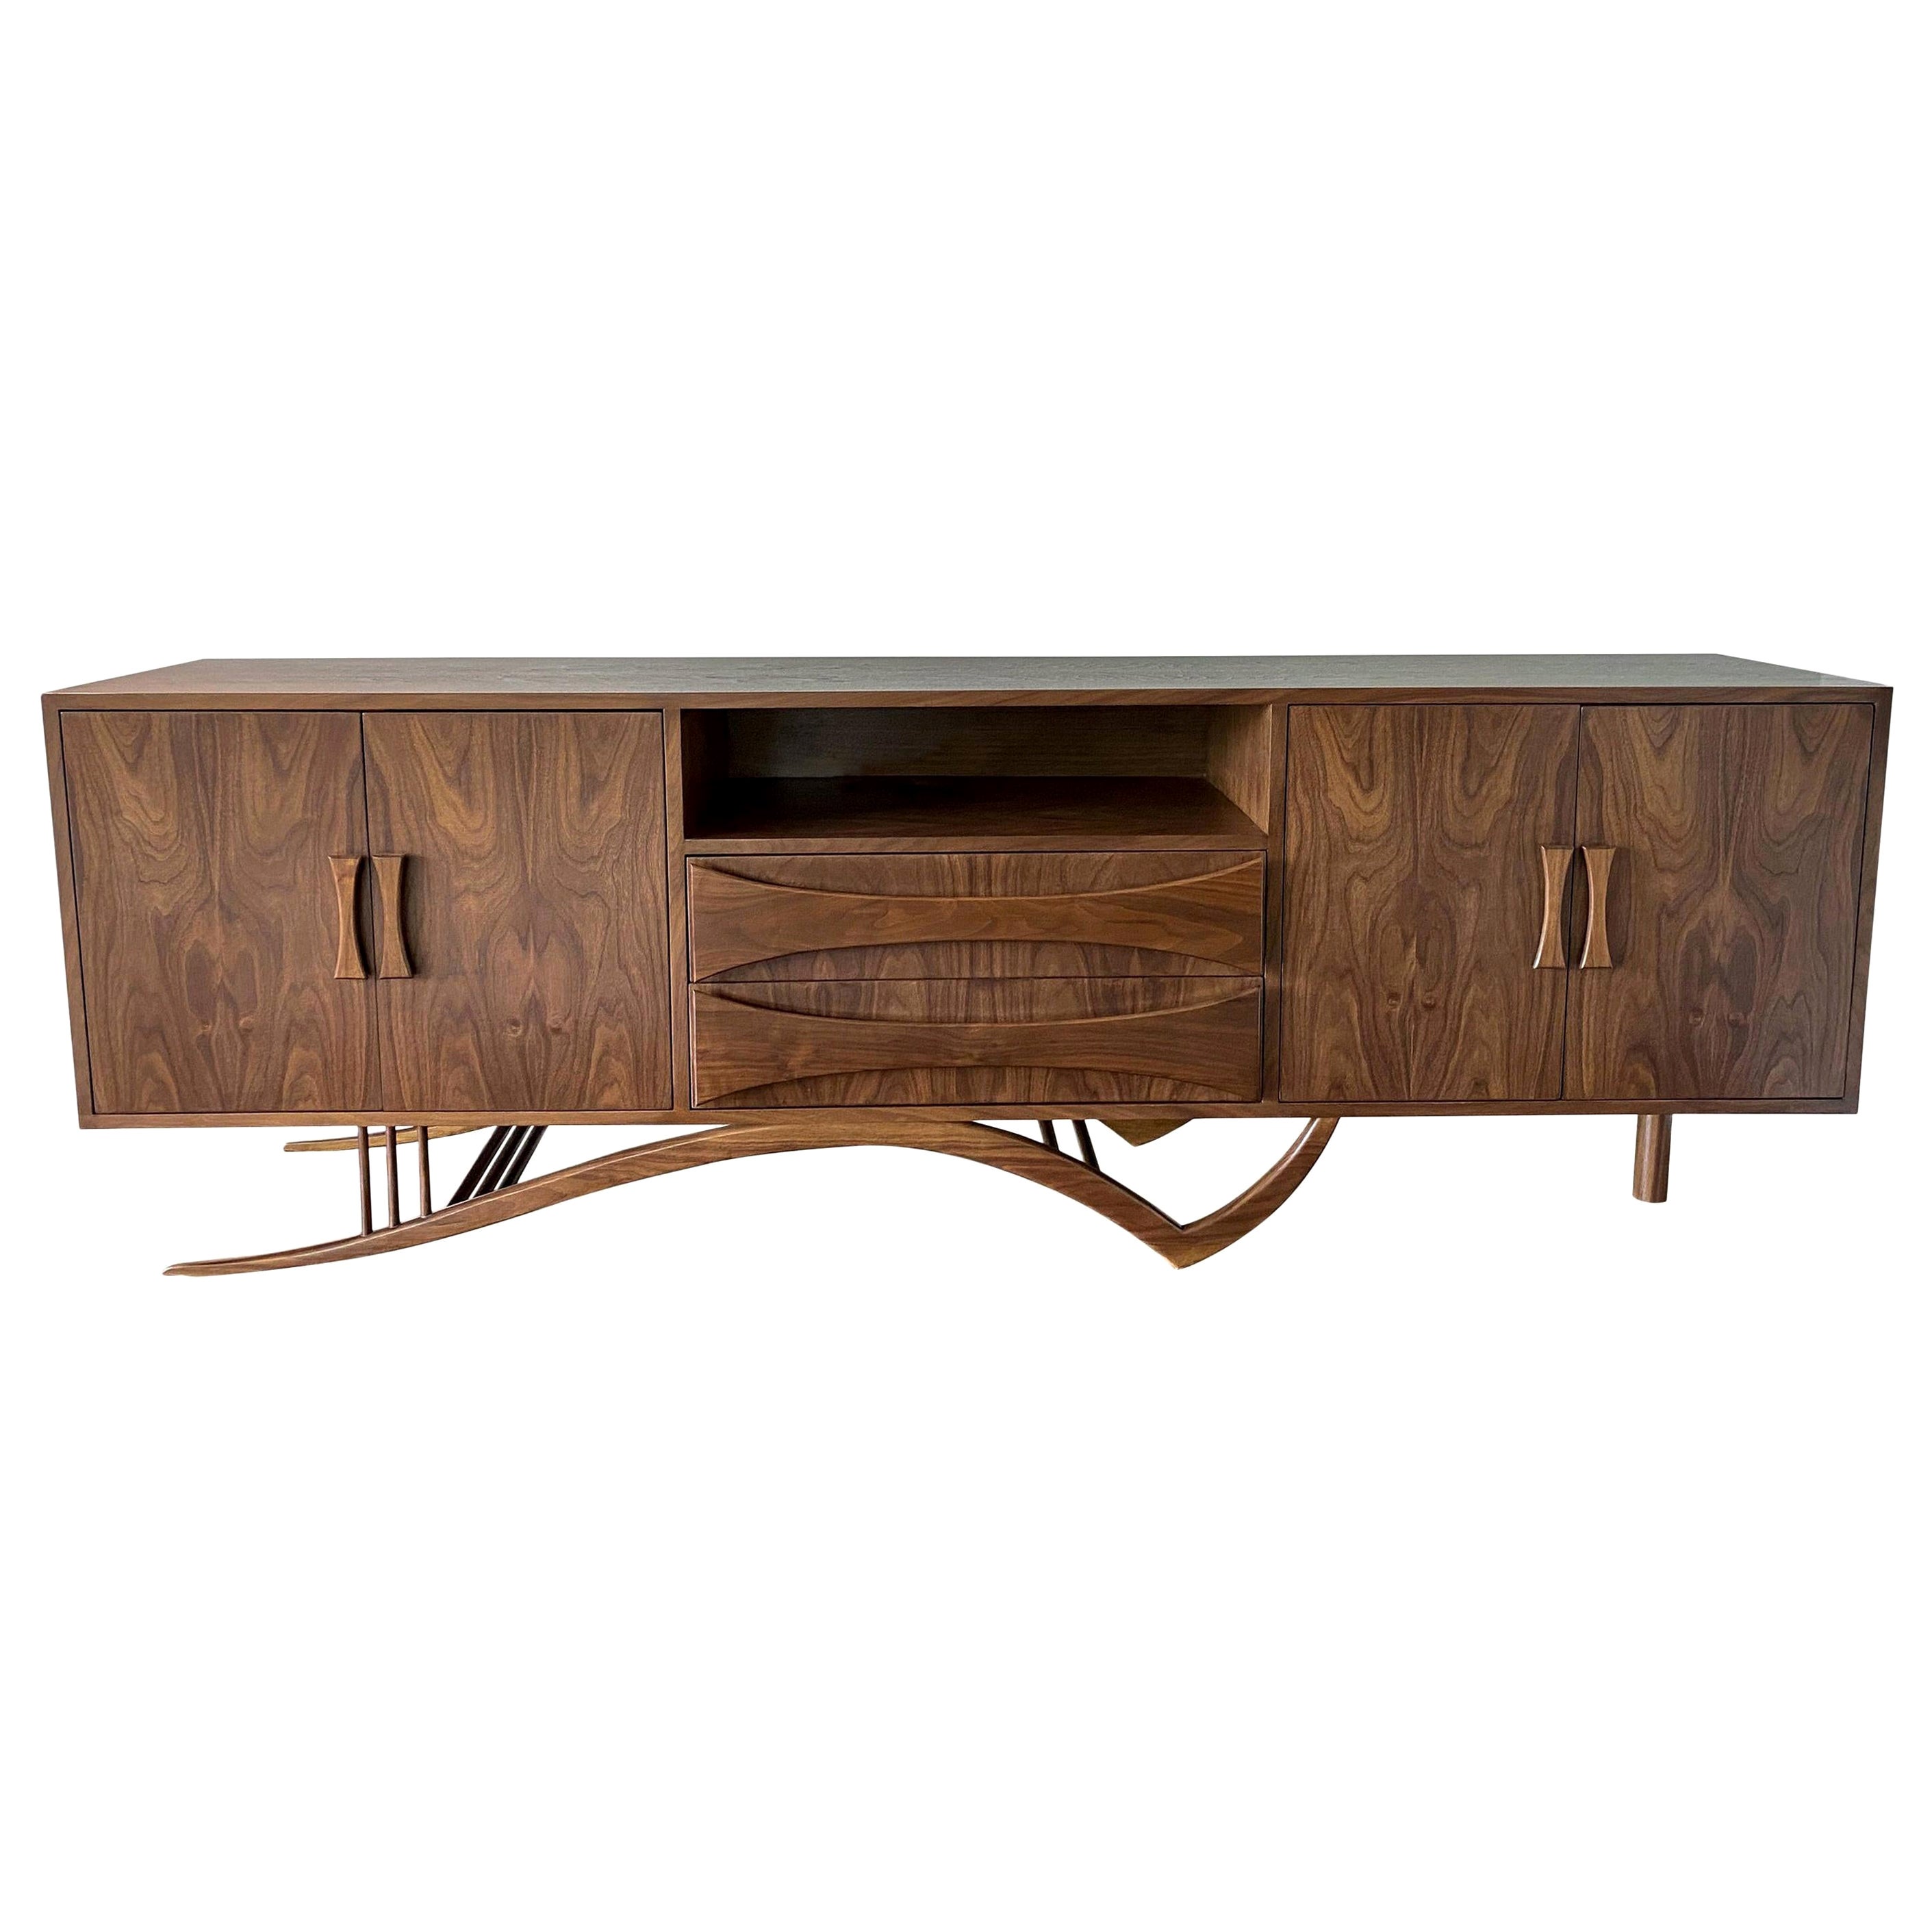 Custom Midcentury Style Walnut Sideboard with Curved Leg by Adesso Imports For Sale